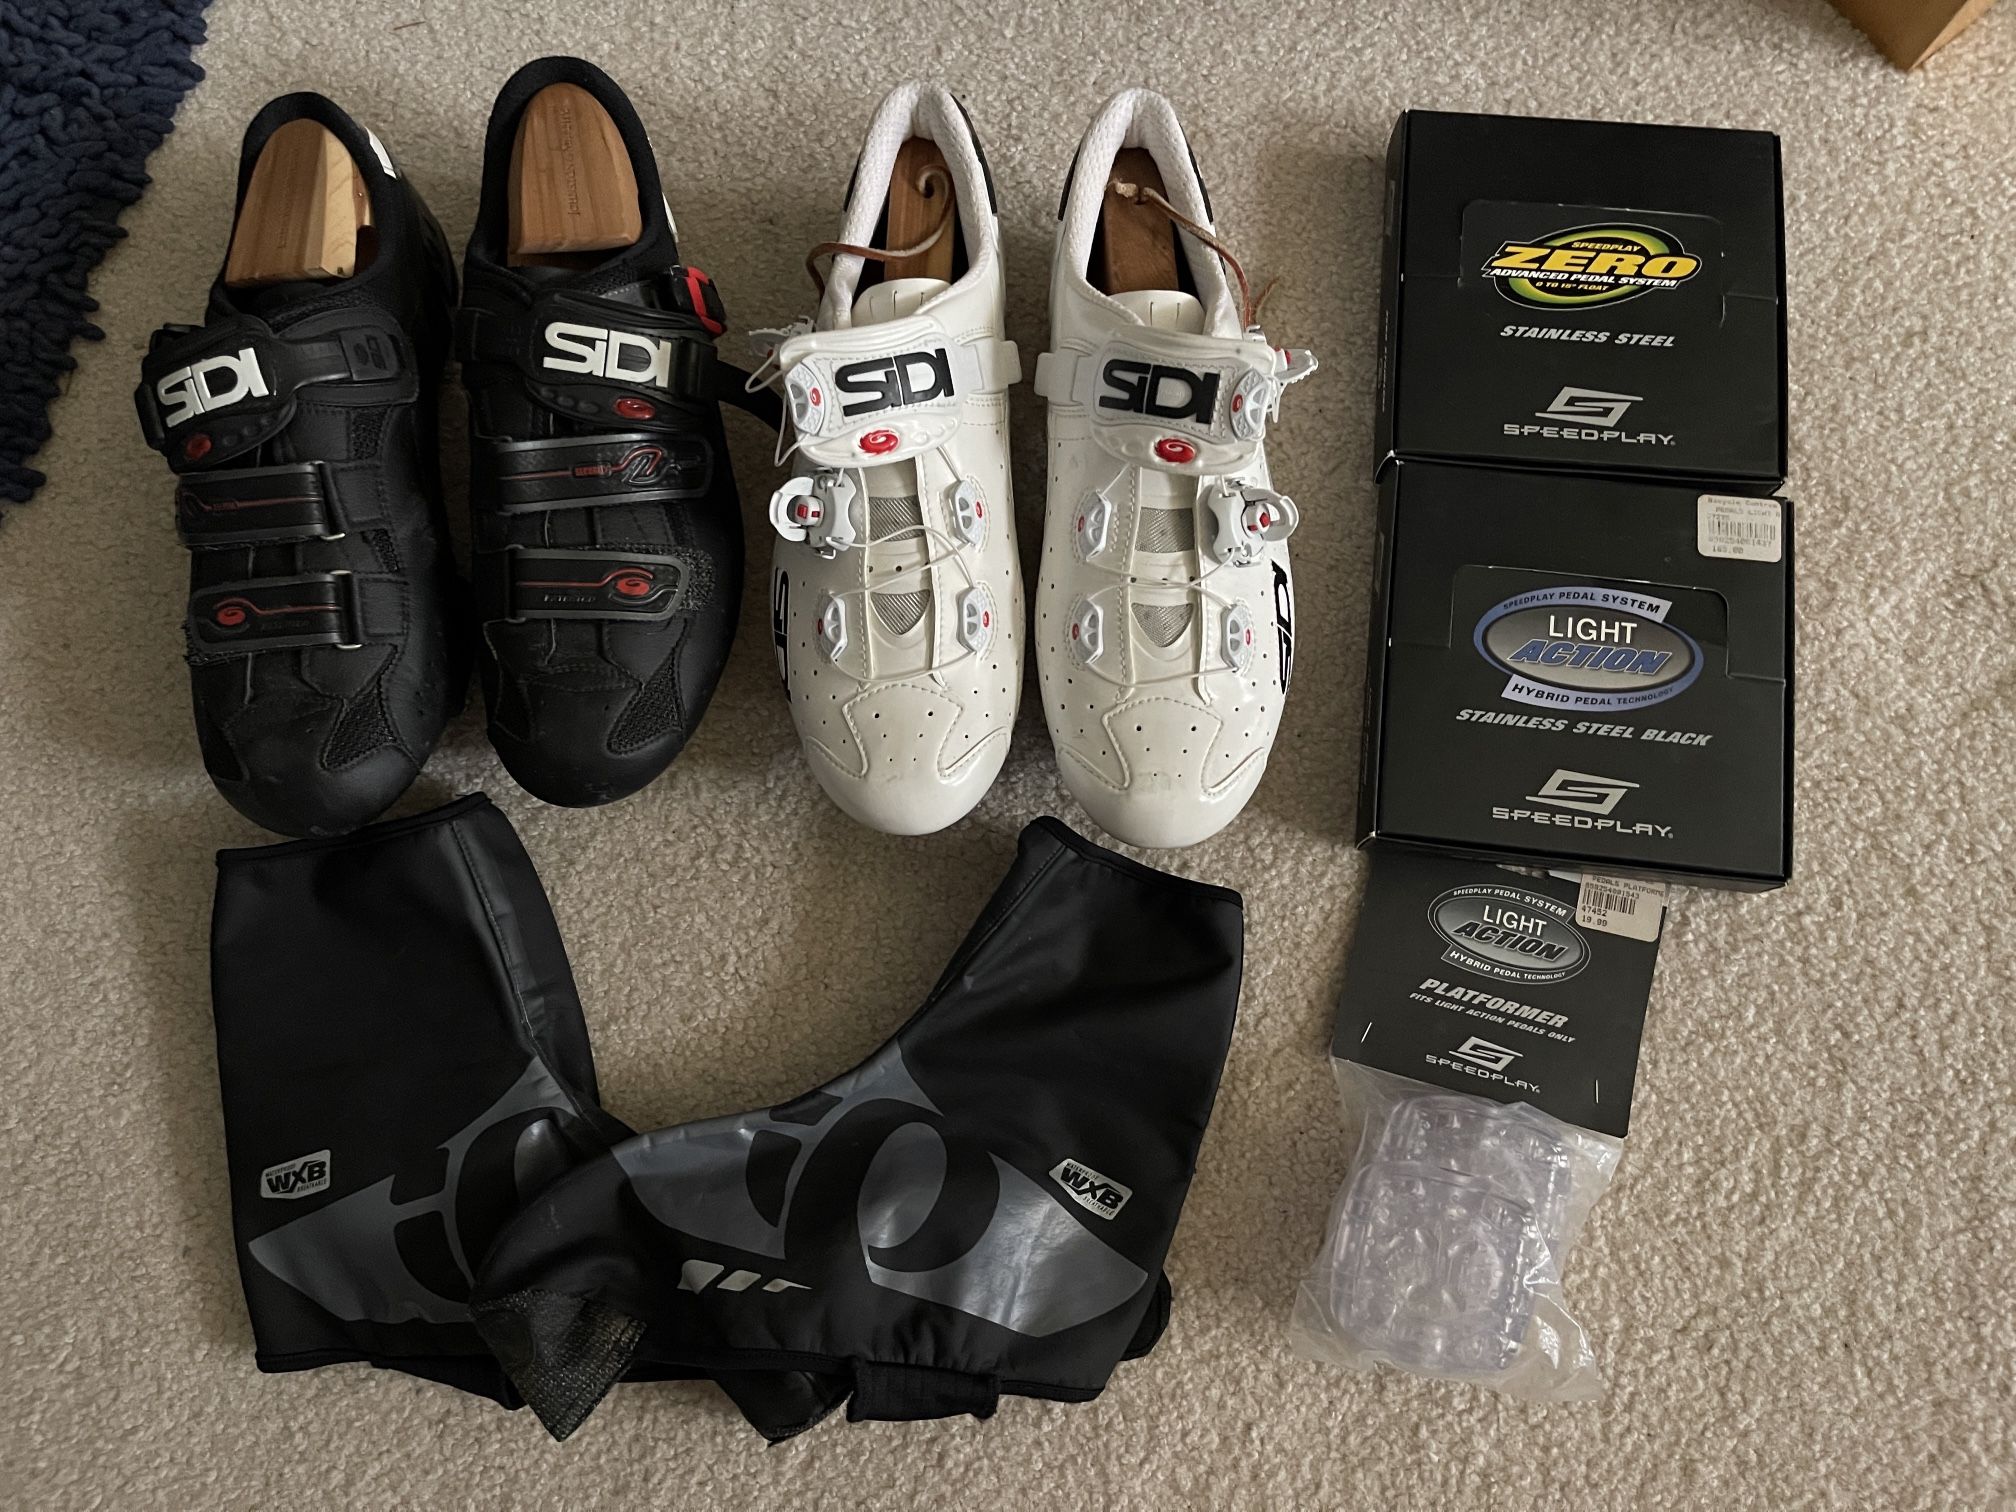 Sidi Road Cycling Shoes And Clips